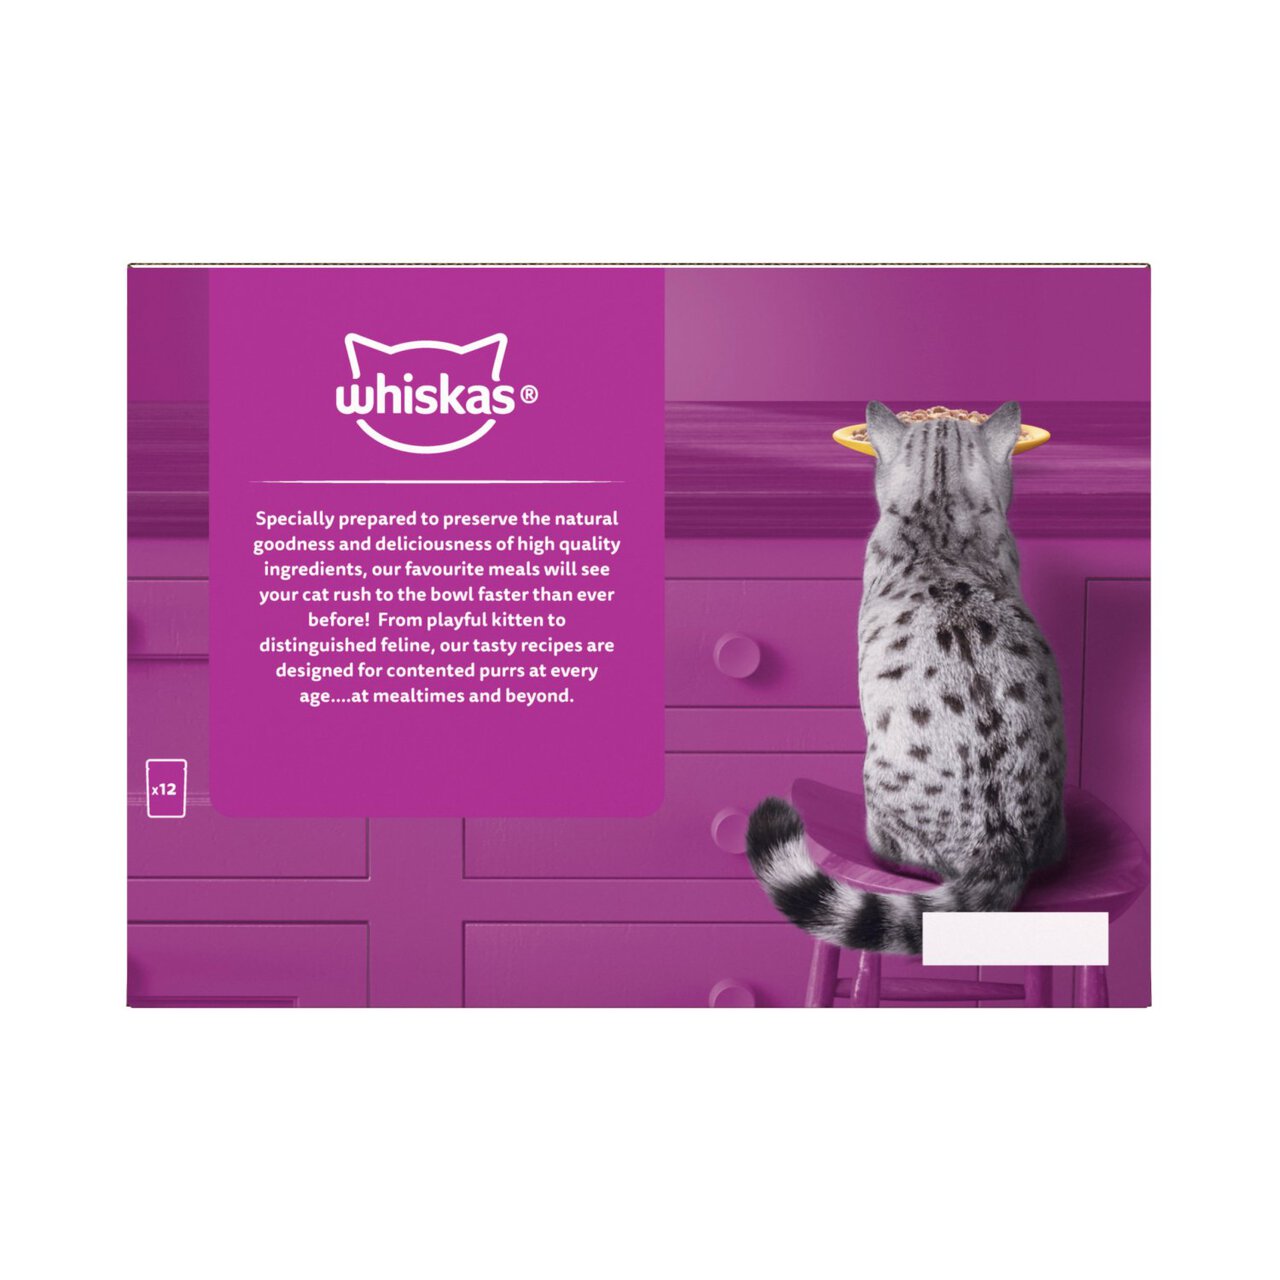 Whiskas 11+ Senior Wet Cat Food Poultry Feasts in Jelly 12 x 85g